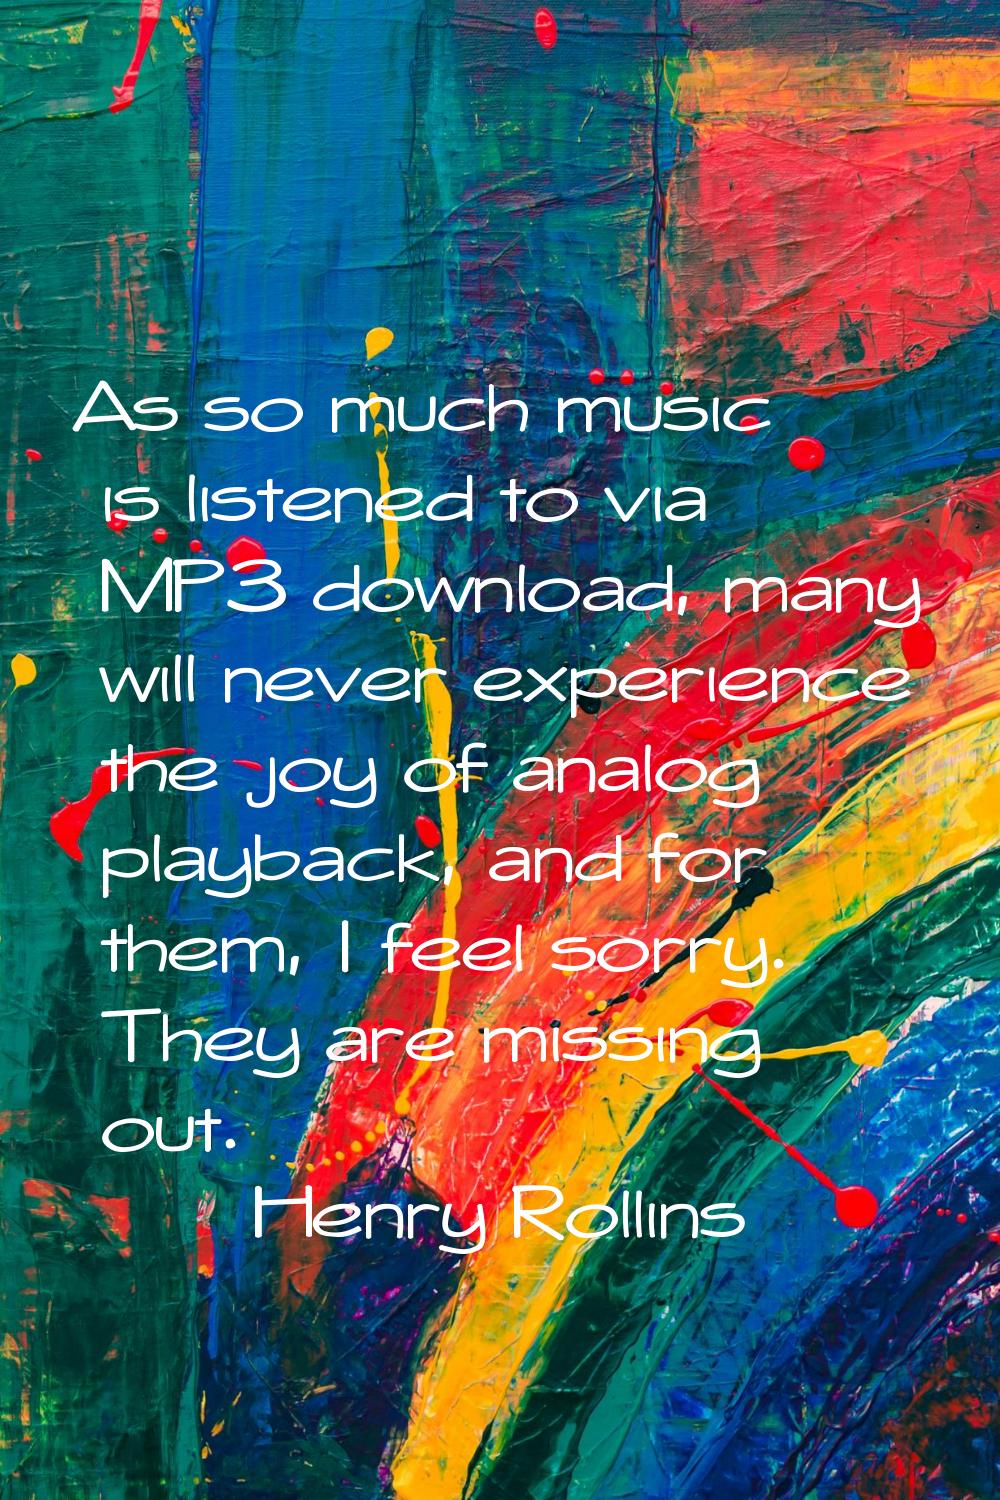 As so much music is listened to via MP3 download, many will never experience the joy of analog play